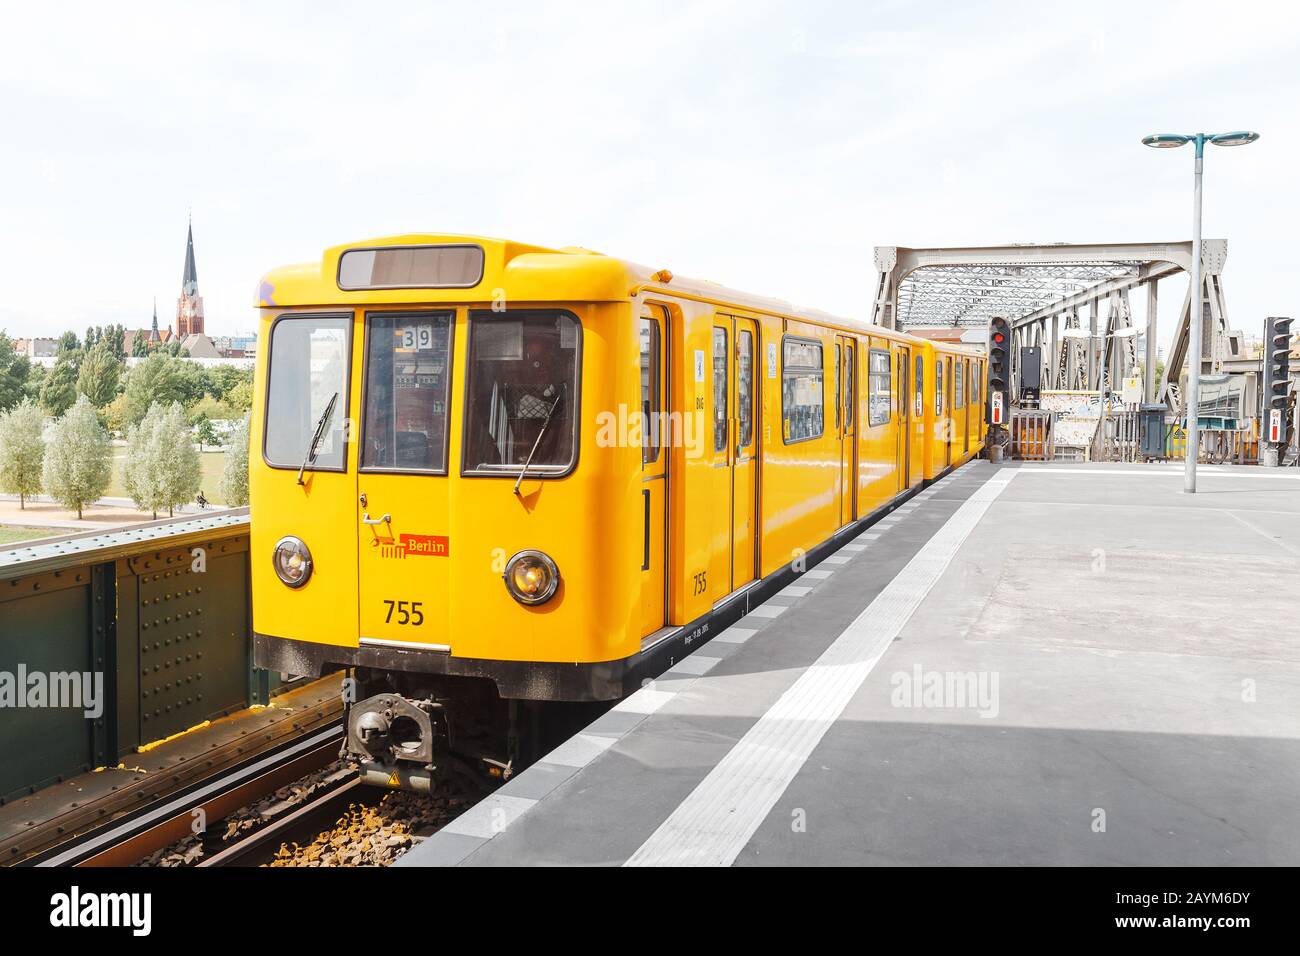 BERLIN, GERMANY - 19 MAY 2018: U-bahn metro station with arriving train Stock Photo